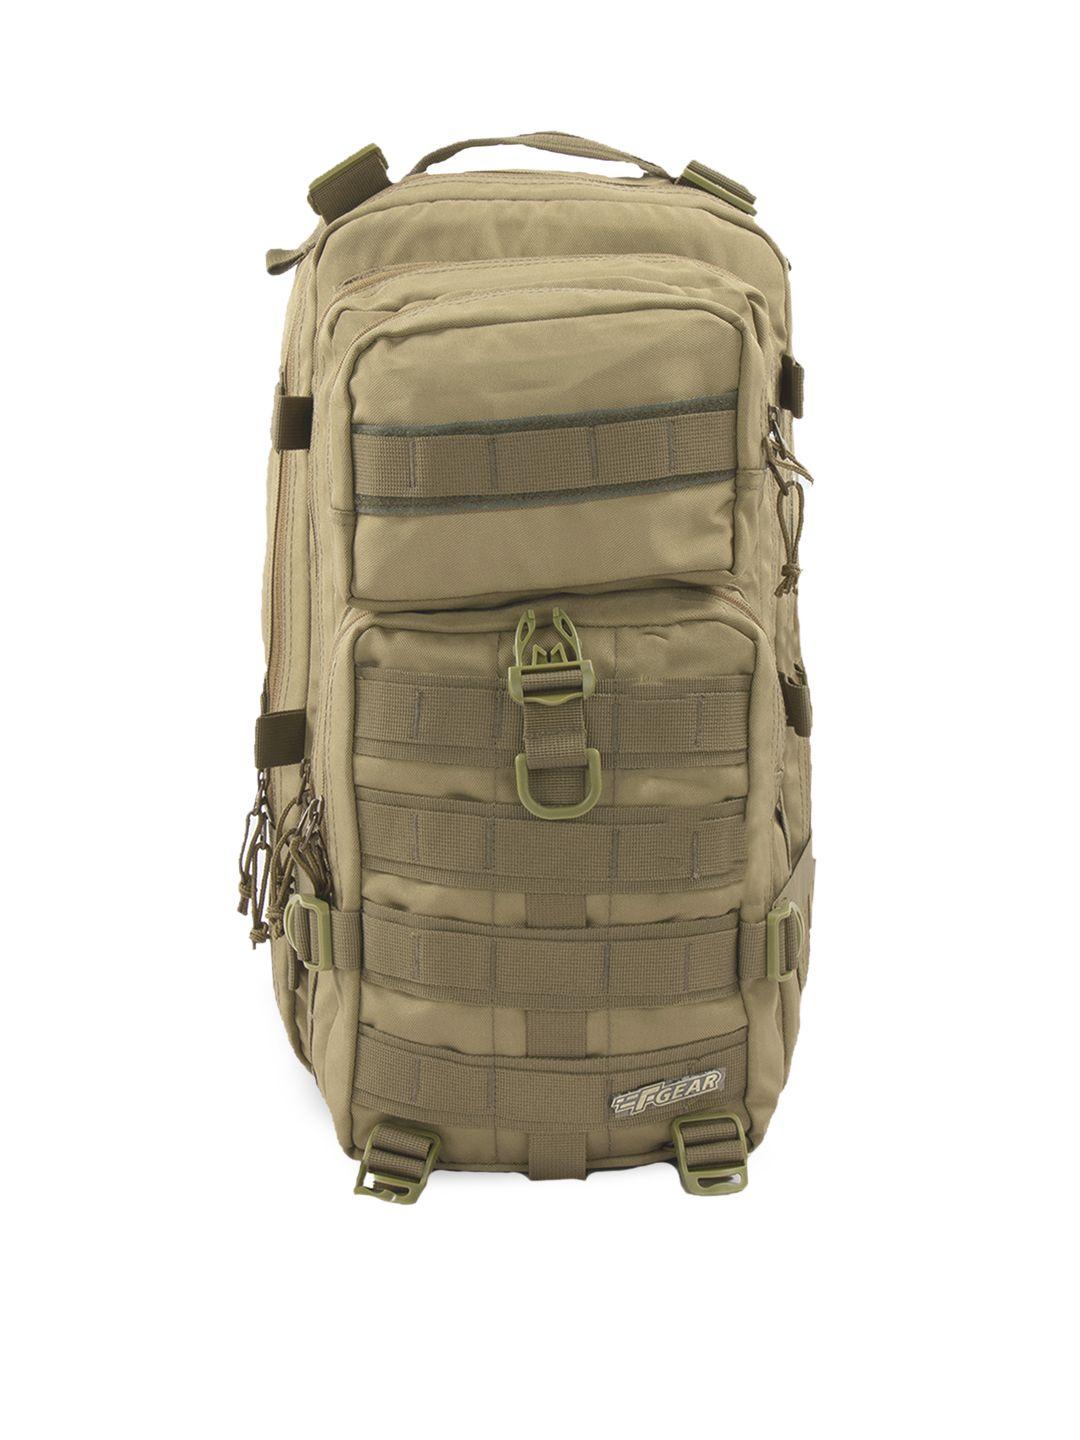 f gear unisex khaki green military tactical solid backpack